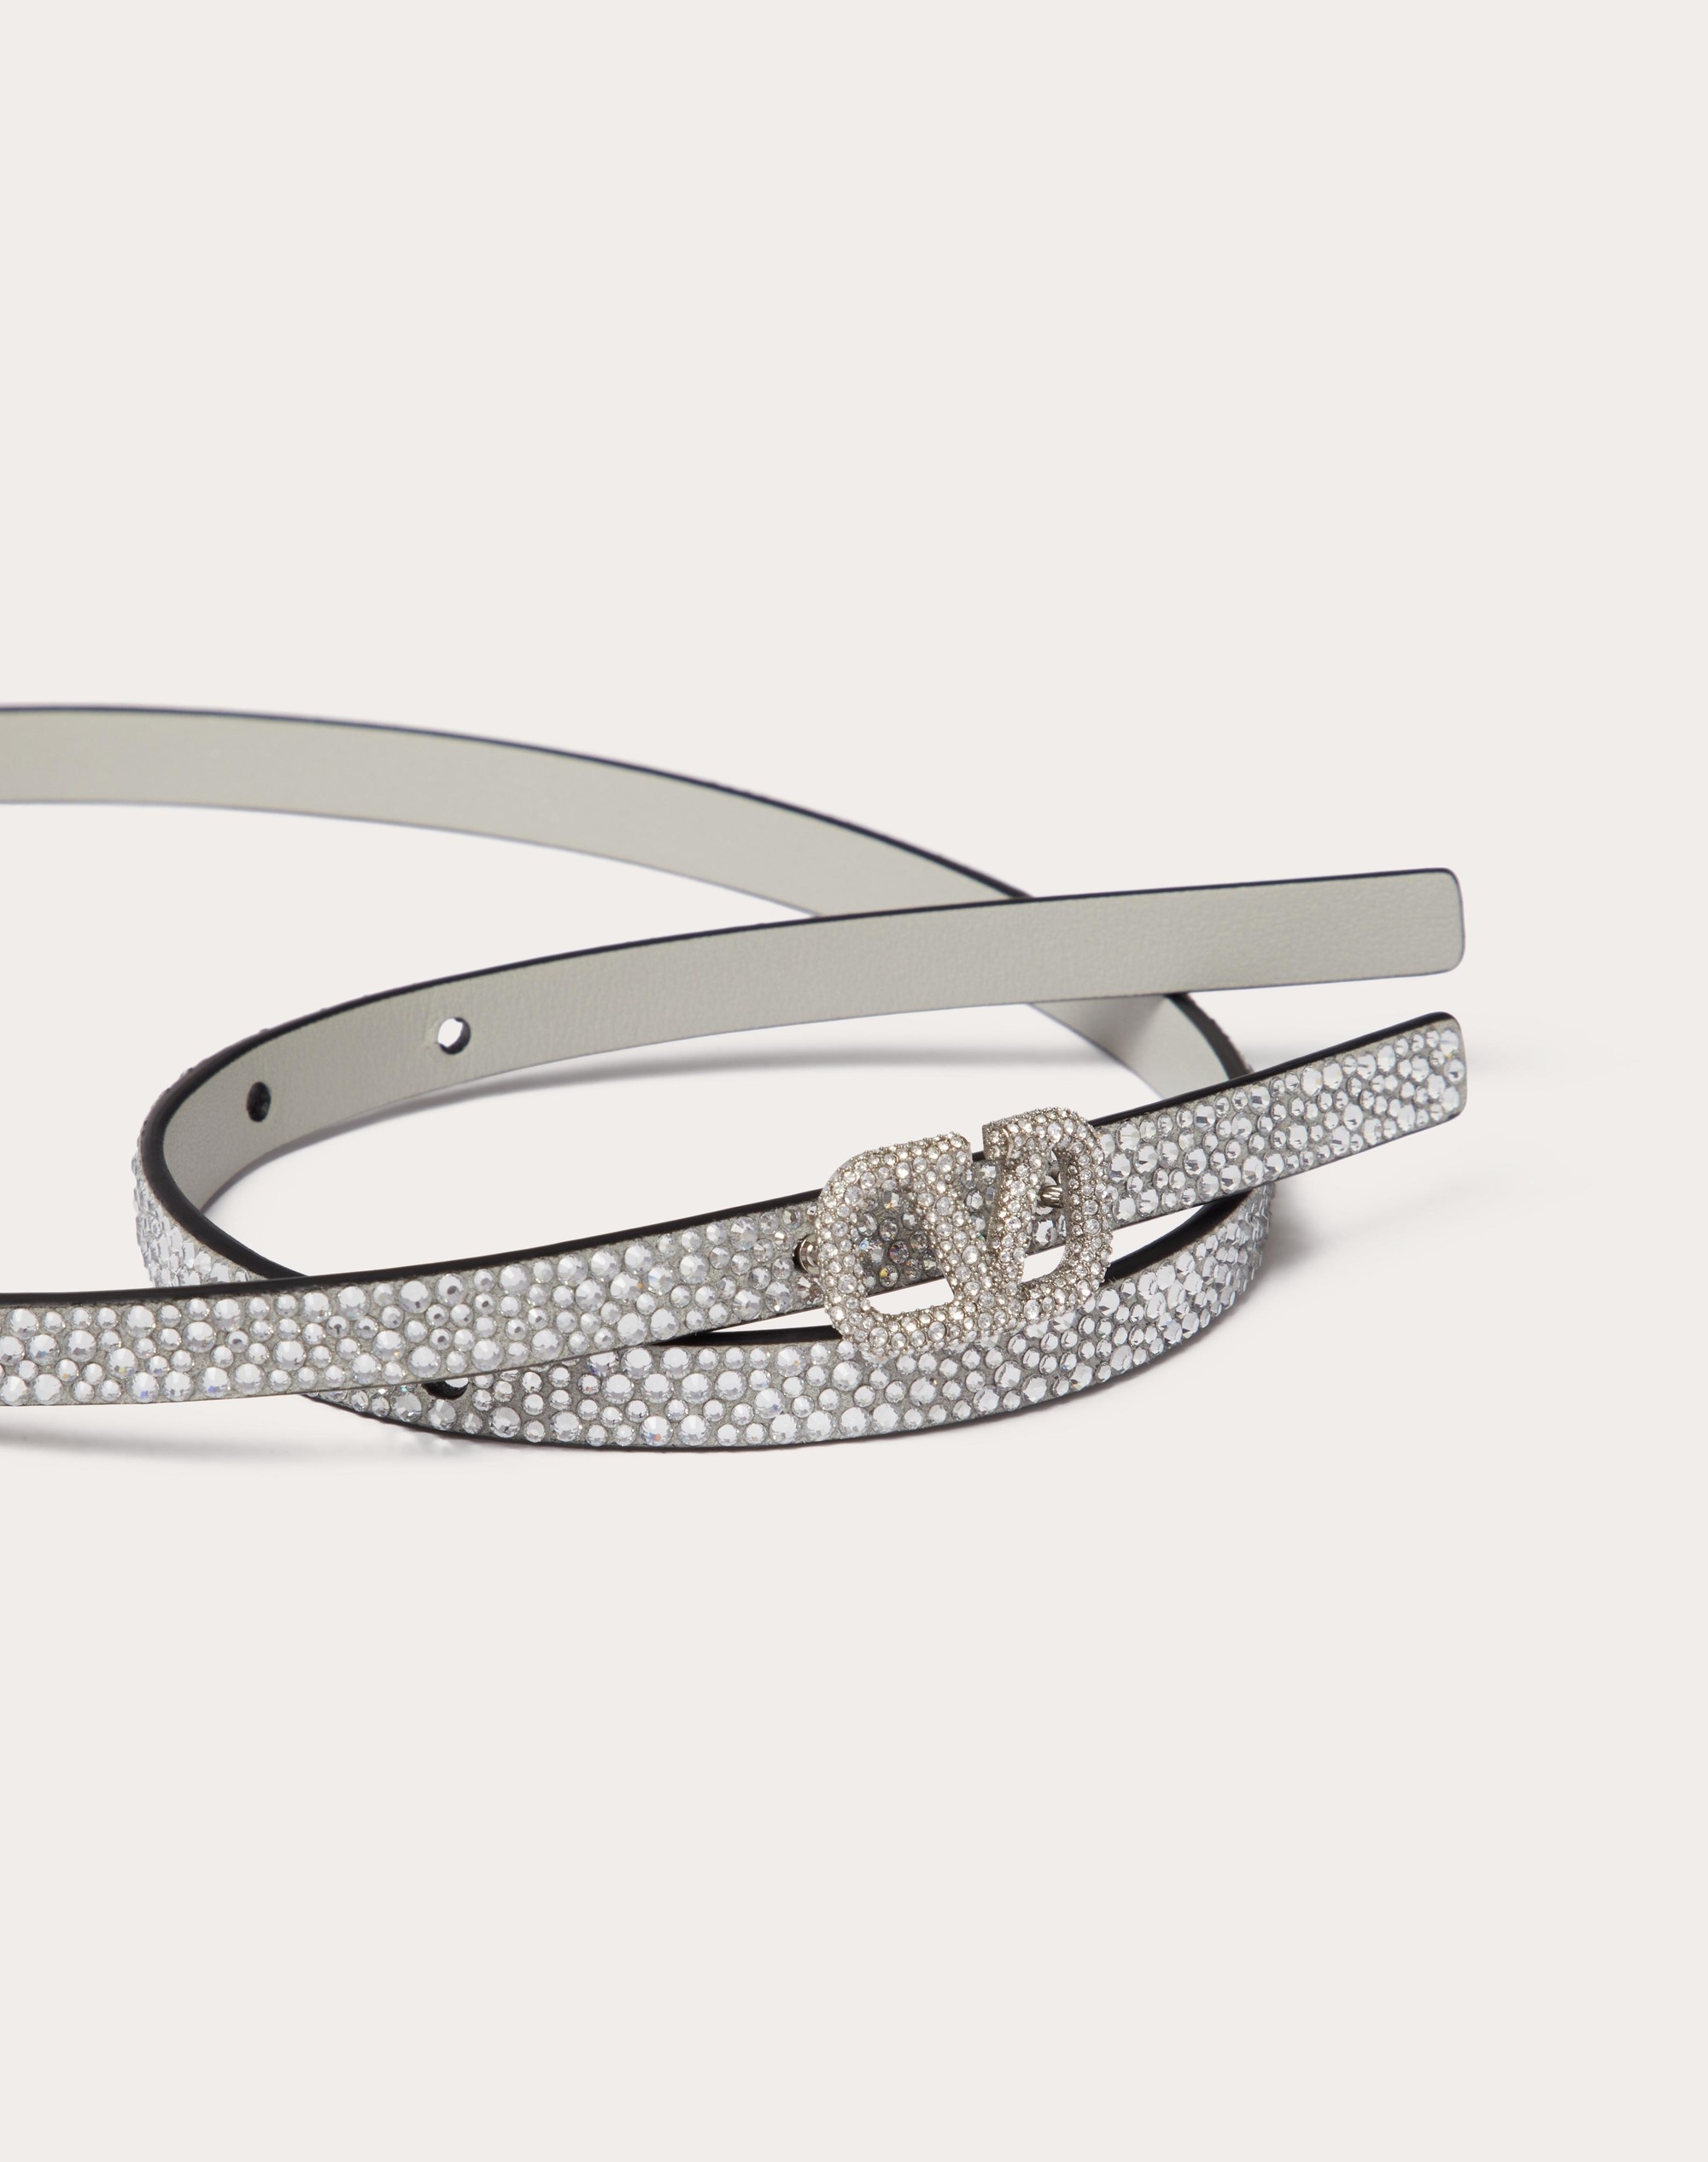 VLOGO SIGNATURE BELT WITH CRYSTALS 10 MM - 2